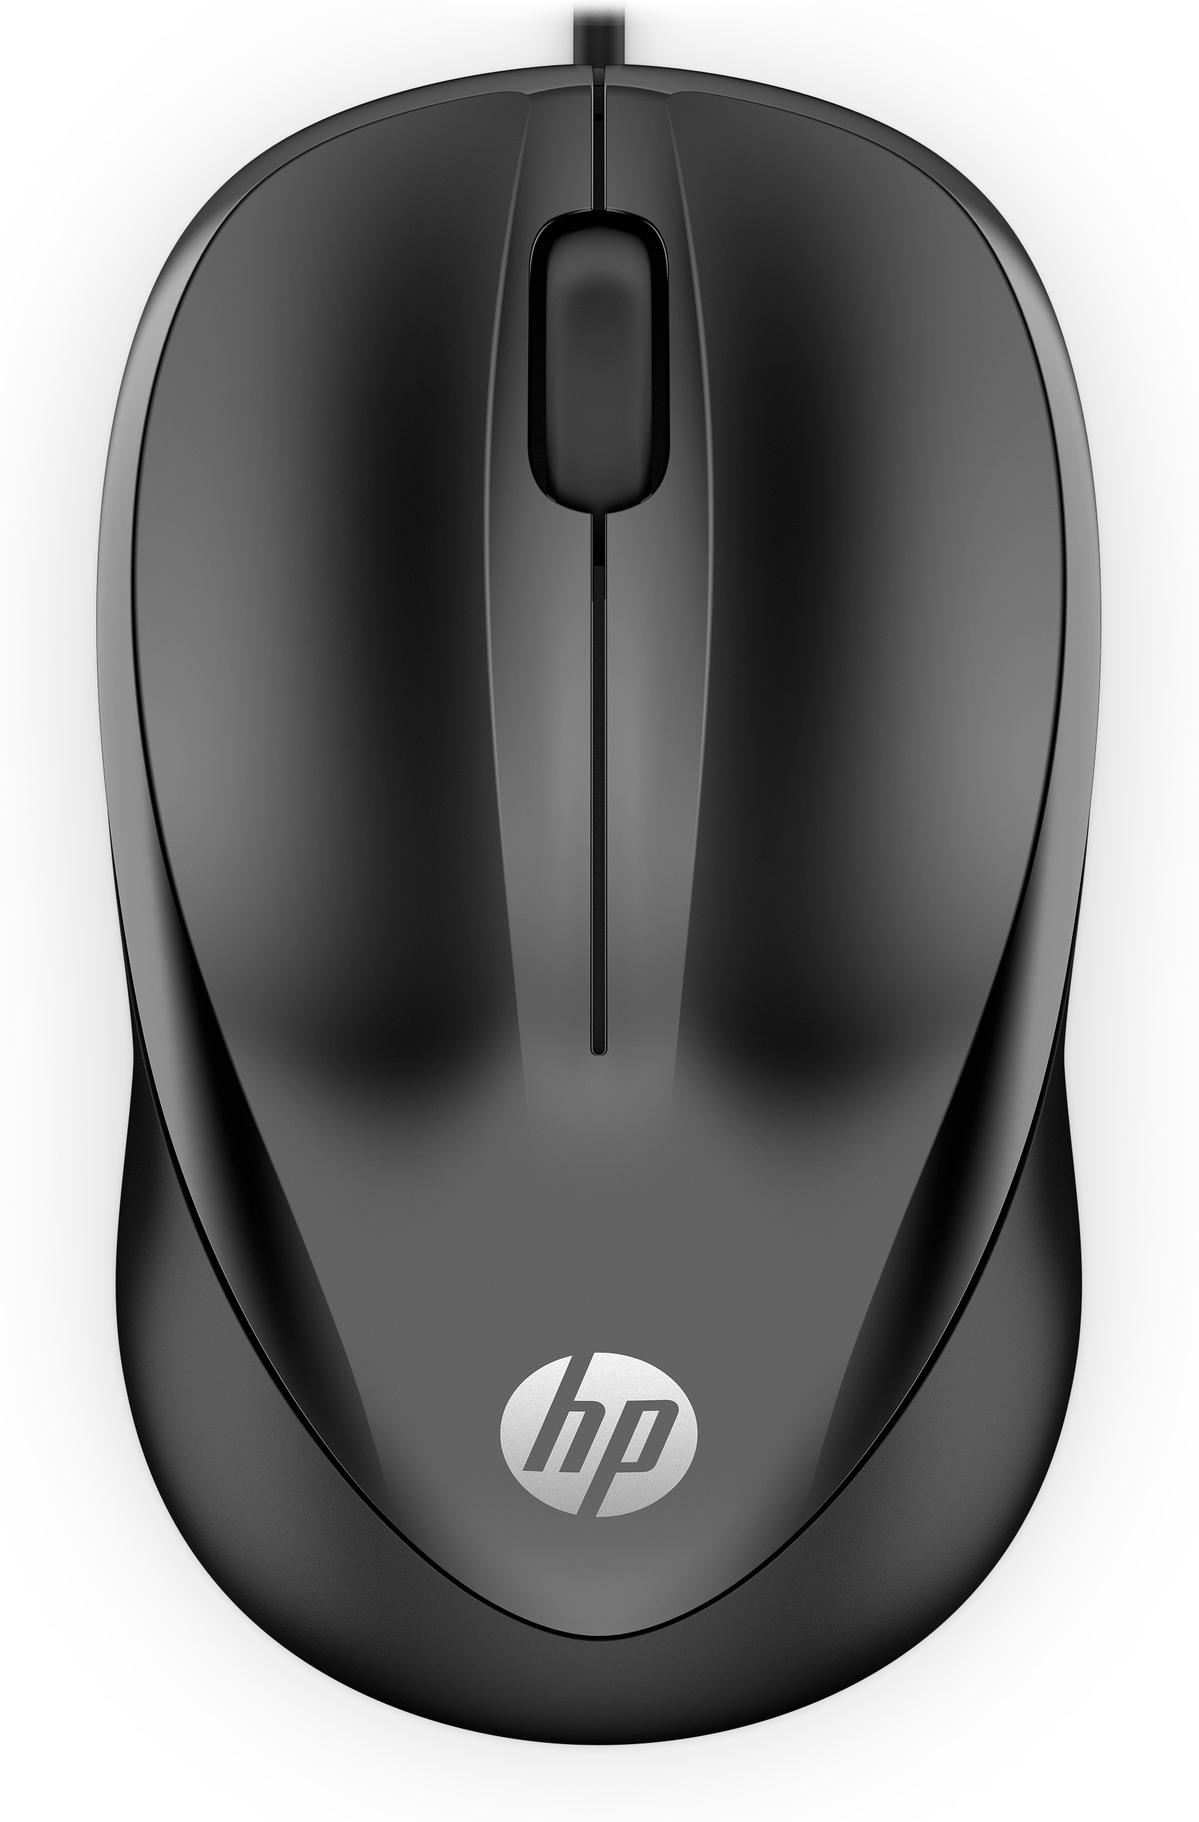 Offerta per HP - Wired Mouse 1000 a 6,95€ in Euronics